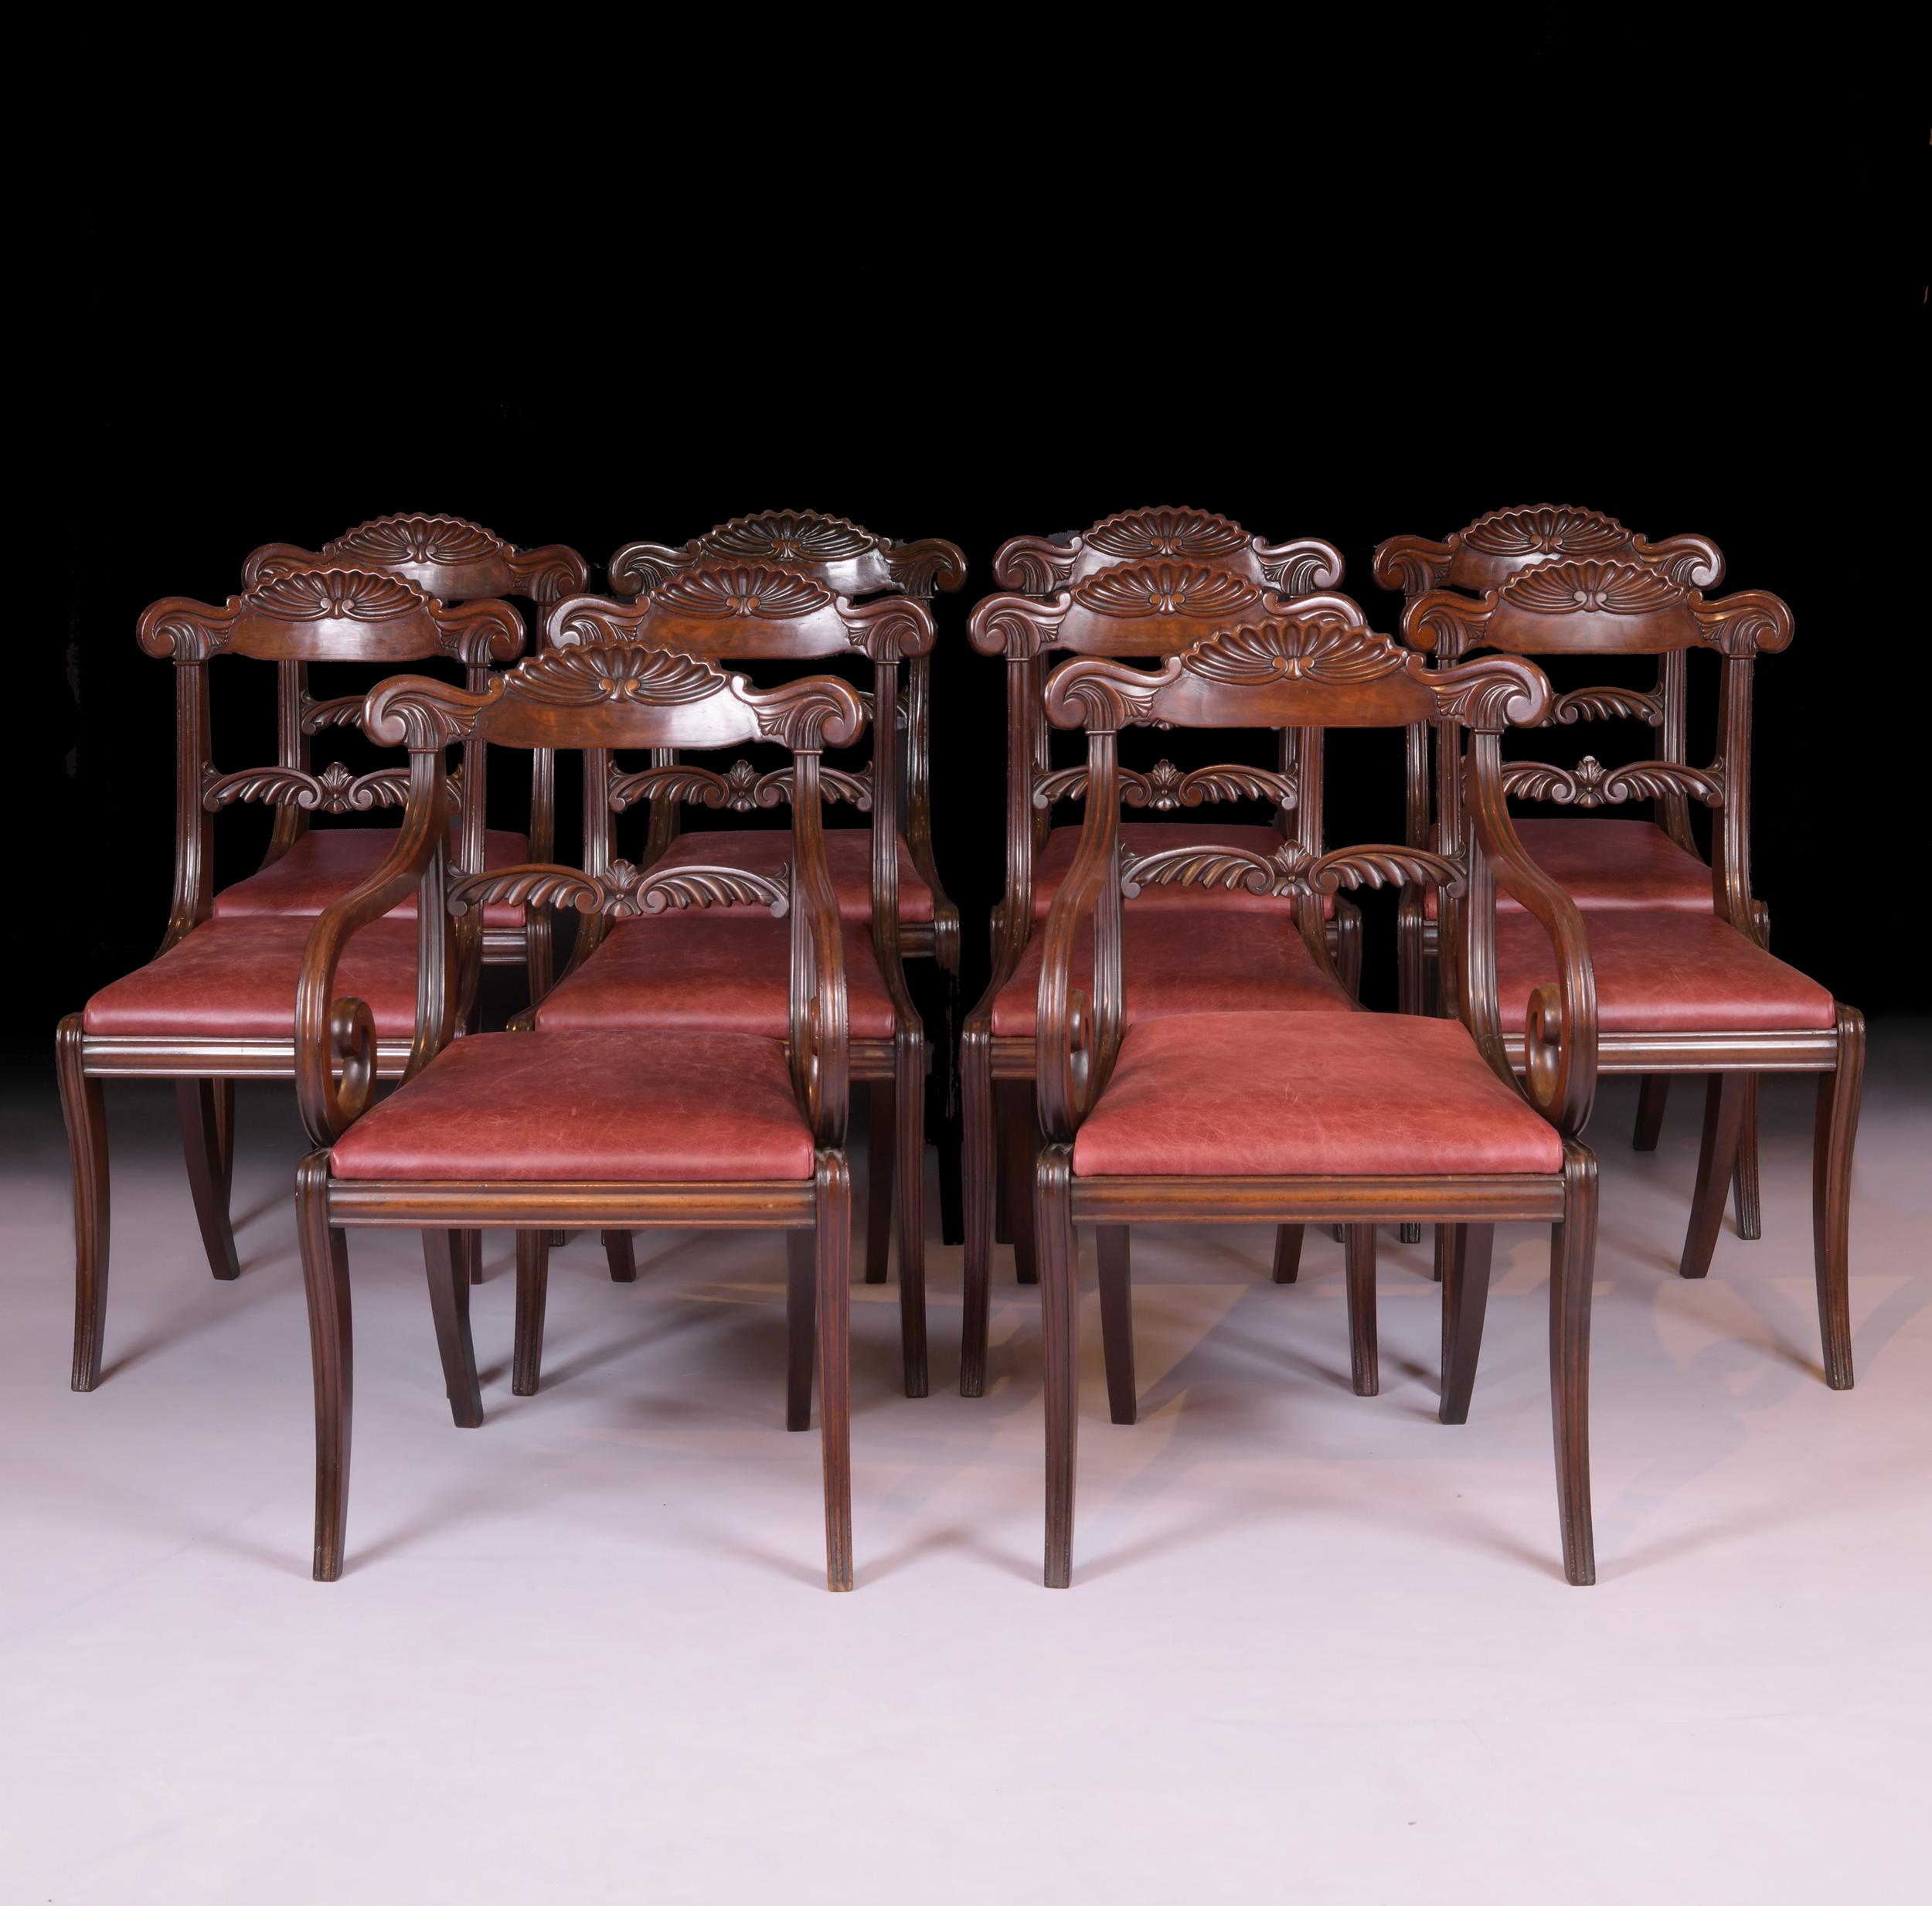 An exceptional set of 10 IRegency mahogany dining chairs, The set comprising of eight side chairs and two armchairs, each with pierced arched top rail, carved with acanthus leaves and scrolls, the bar backs with shaped splats have beautiful hand